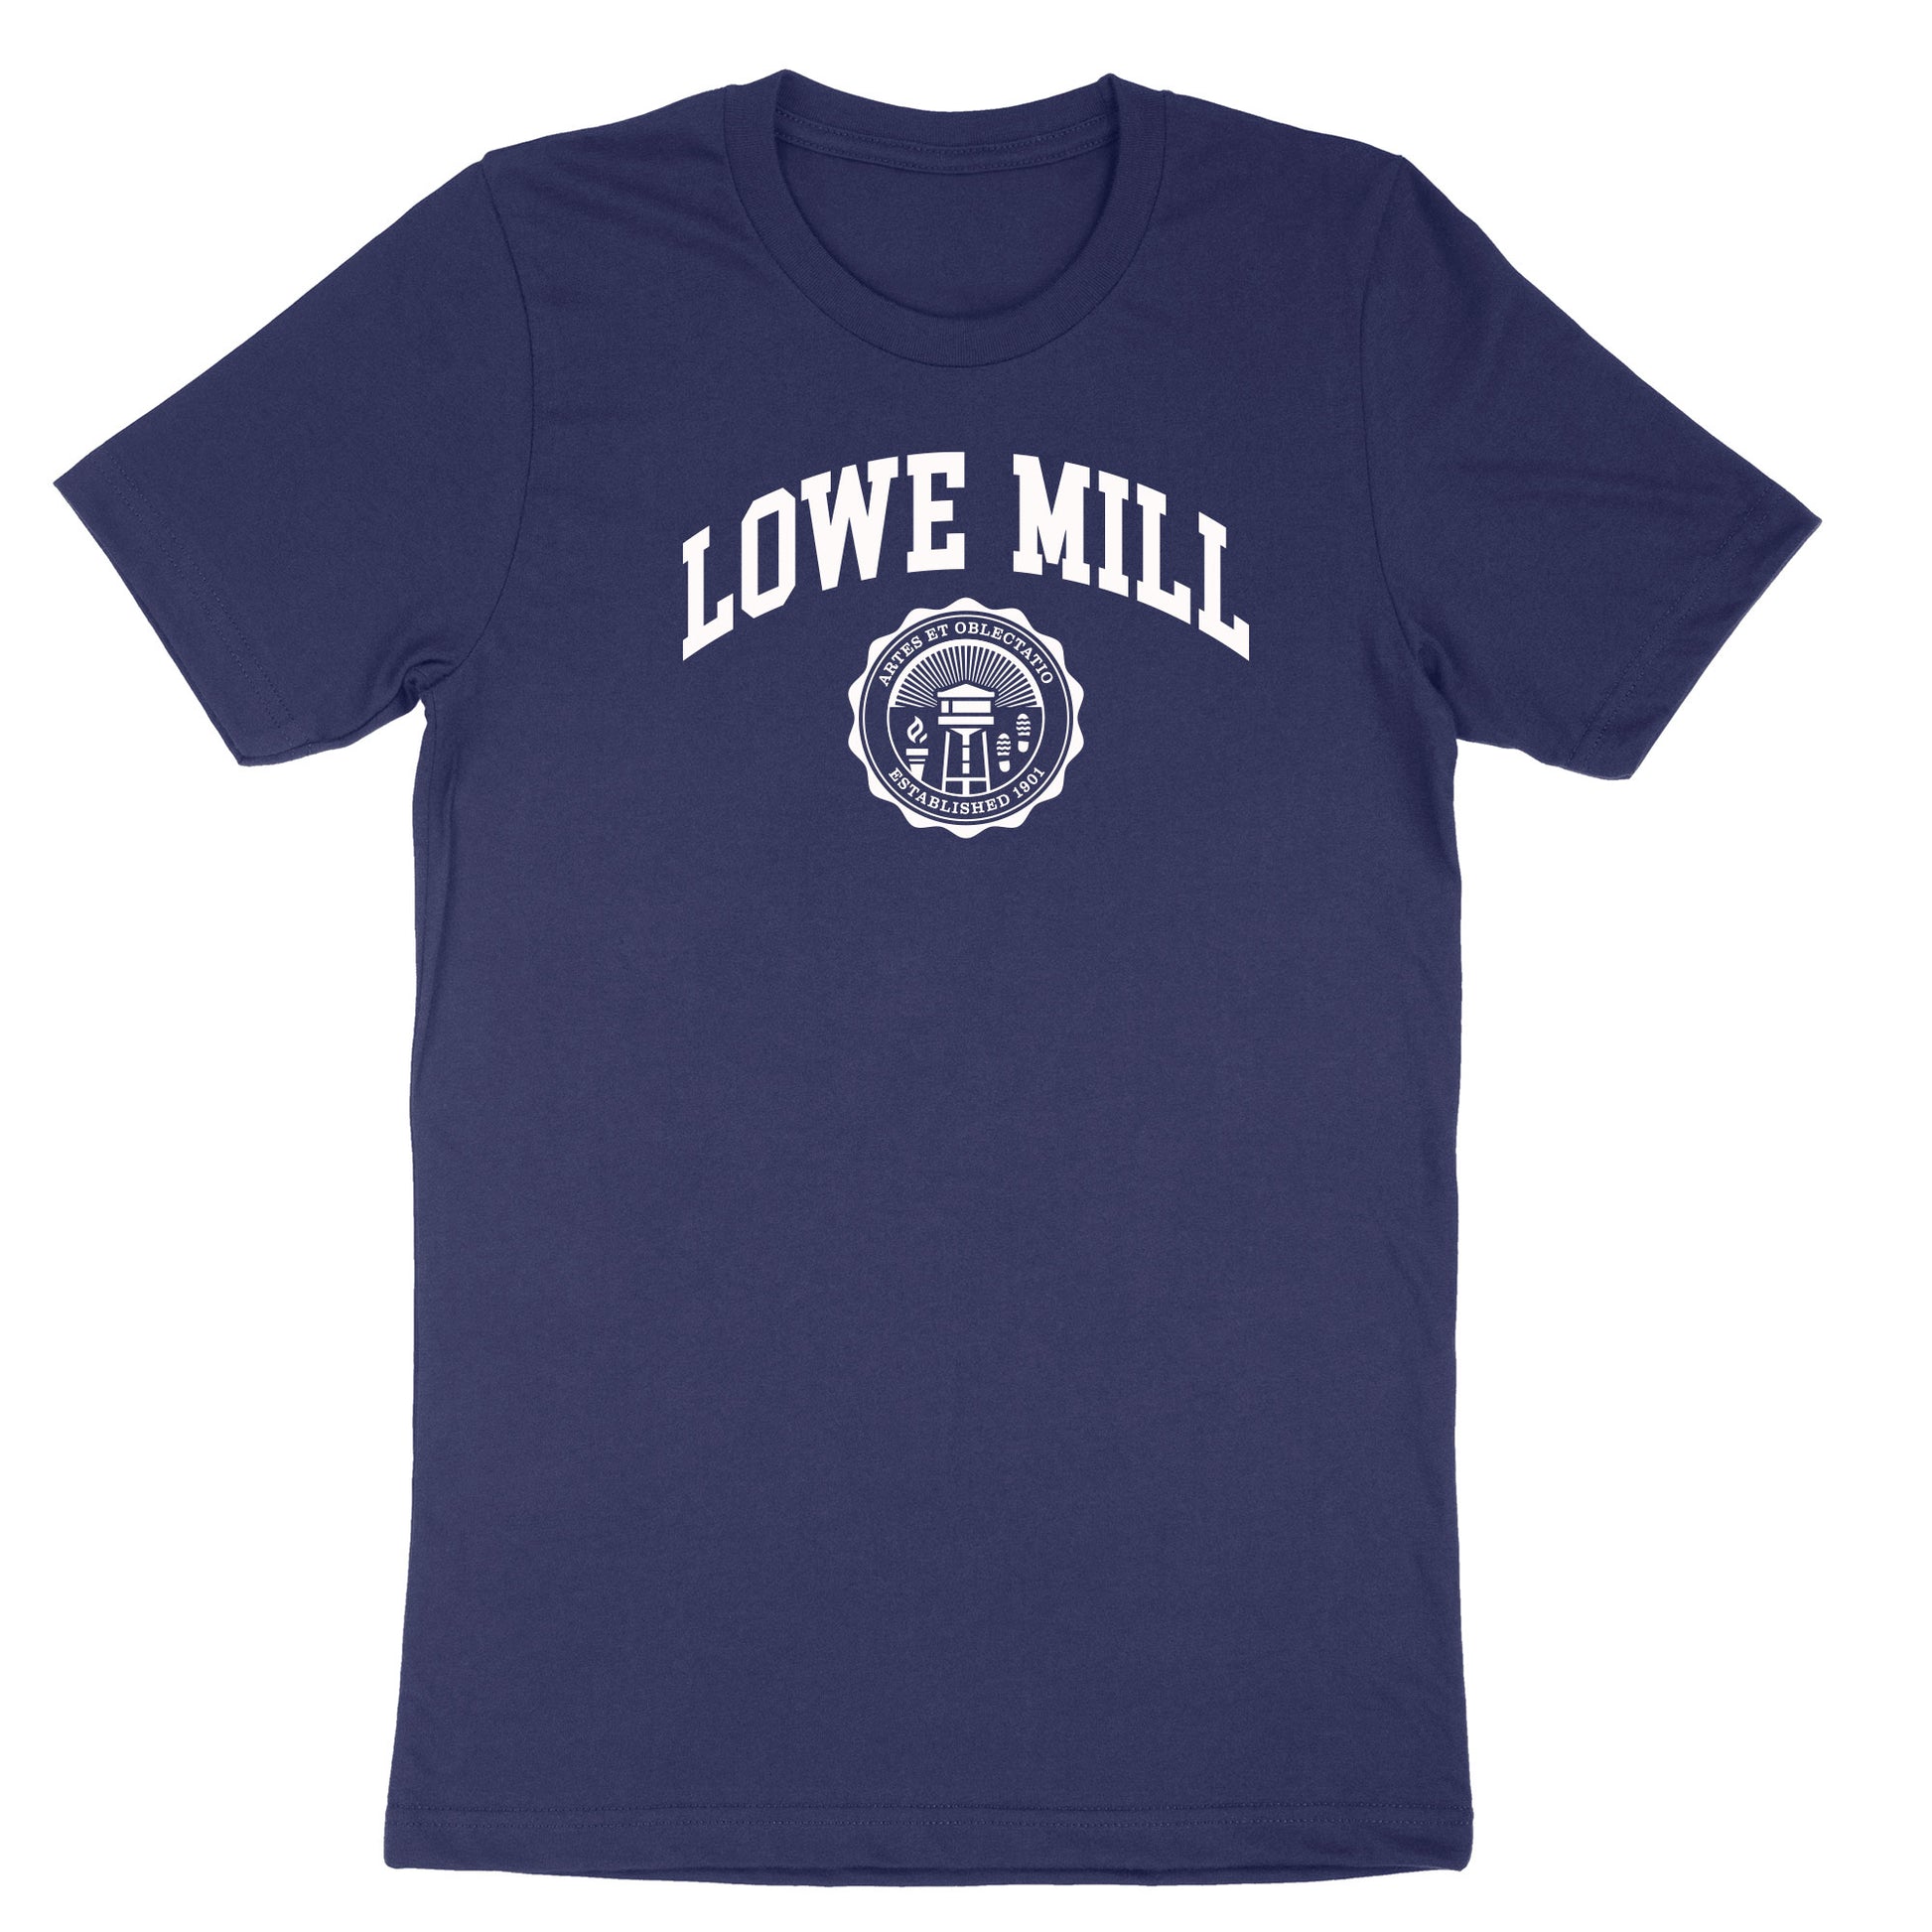 Image of navy t-shirt with white collegiate Lowe Mill design, including crest which reads "ARTES ET OBLECTATIO; ESTABLISHED 1901"